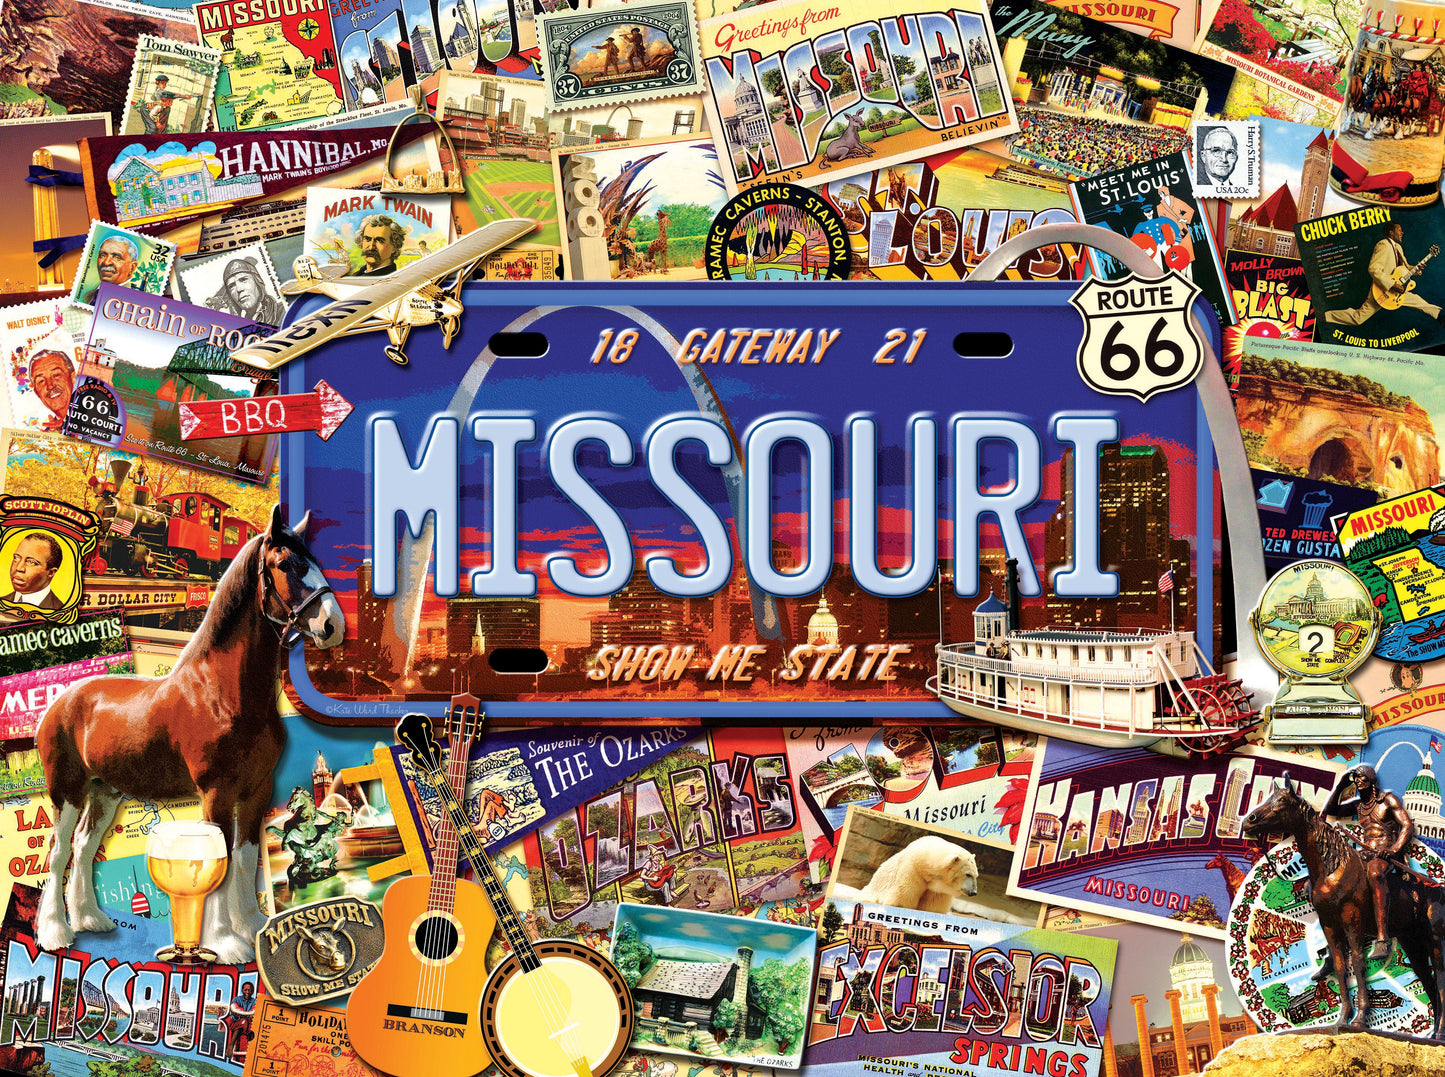 Missouri: The "Show Me" State - 1000 Piece Jigsaw Puzzle